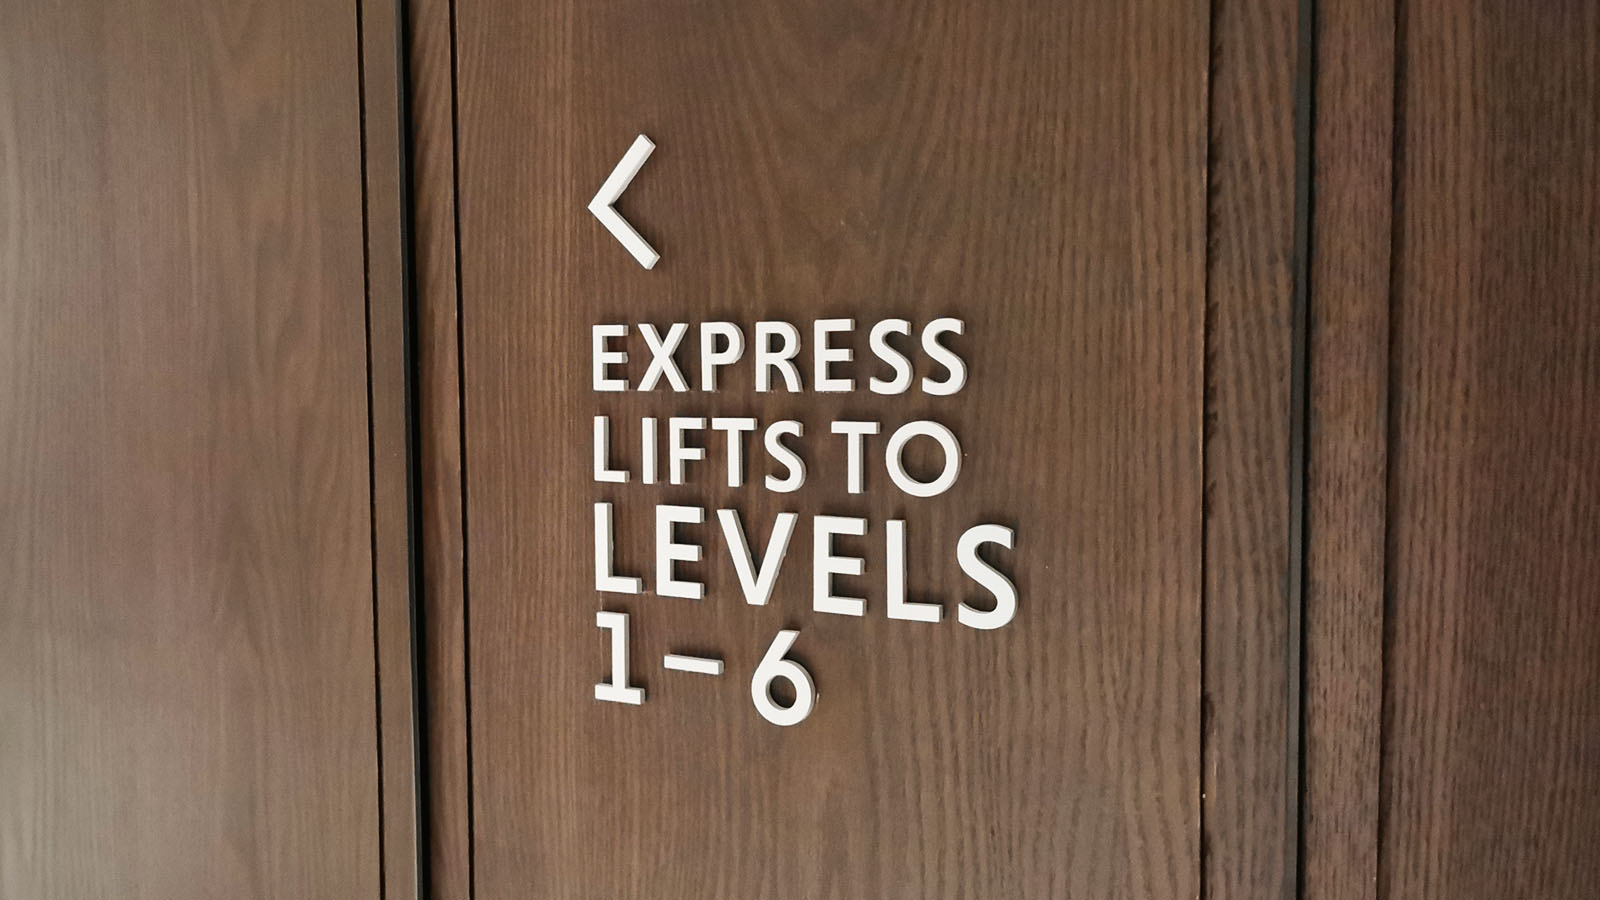 Lift sign for floors 1-6 at Hilton Singapore Orchard hotel